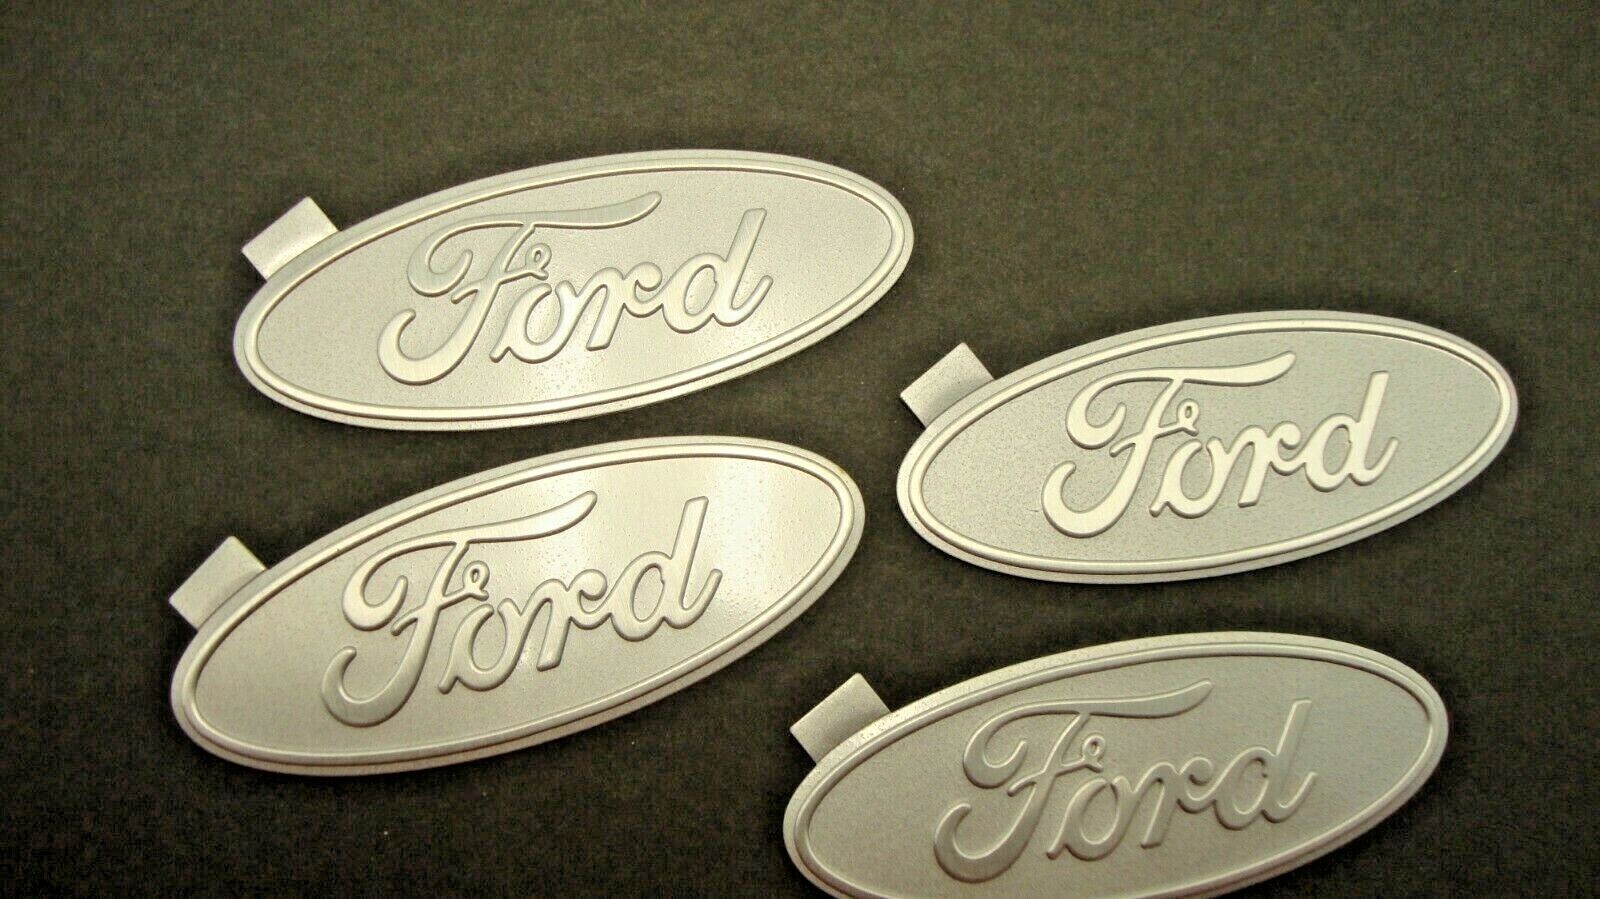 Lot of 4 Ford Aluminum stickers 4